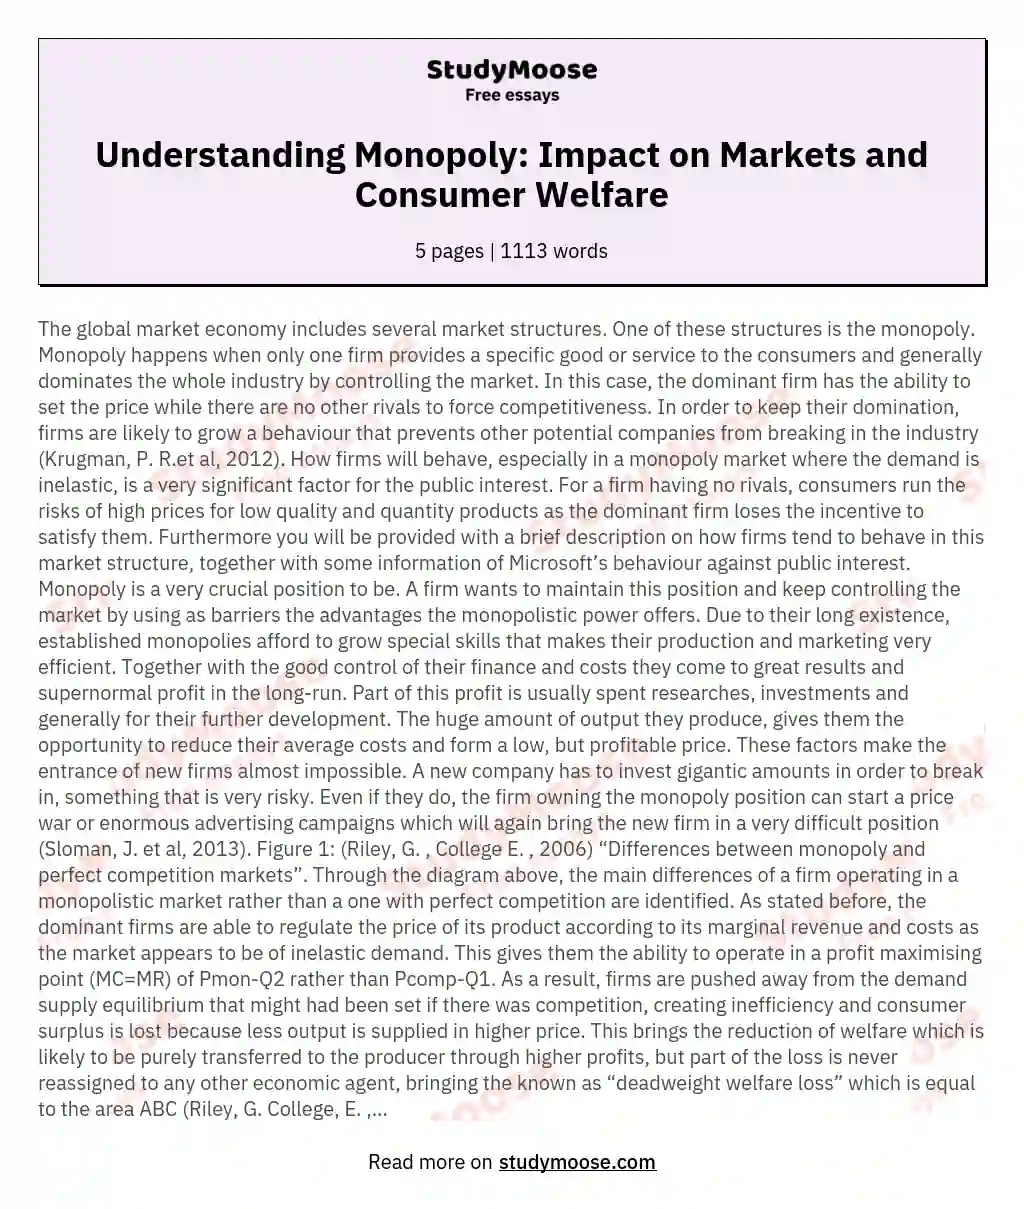 Understanding Monopoly: Impact on Markets and Consumer Welfare essay